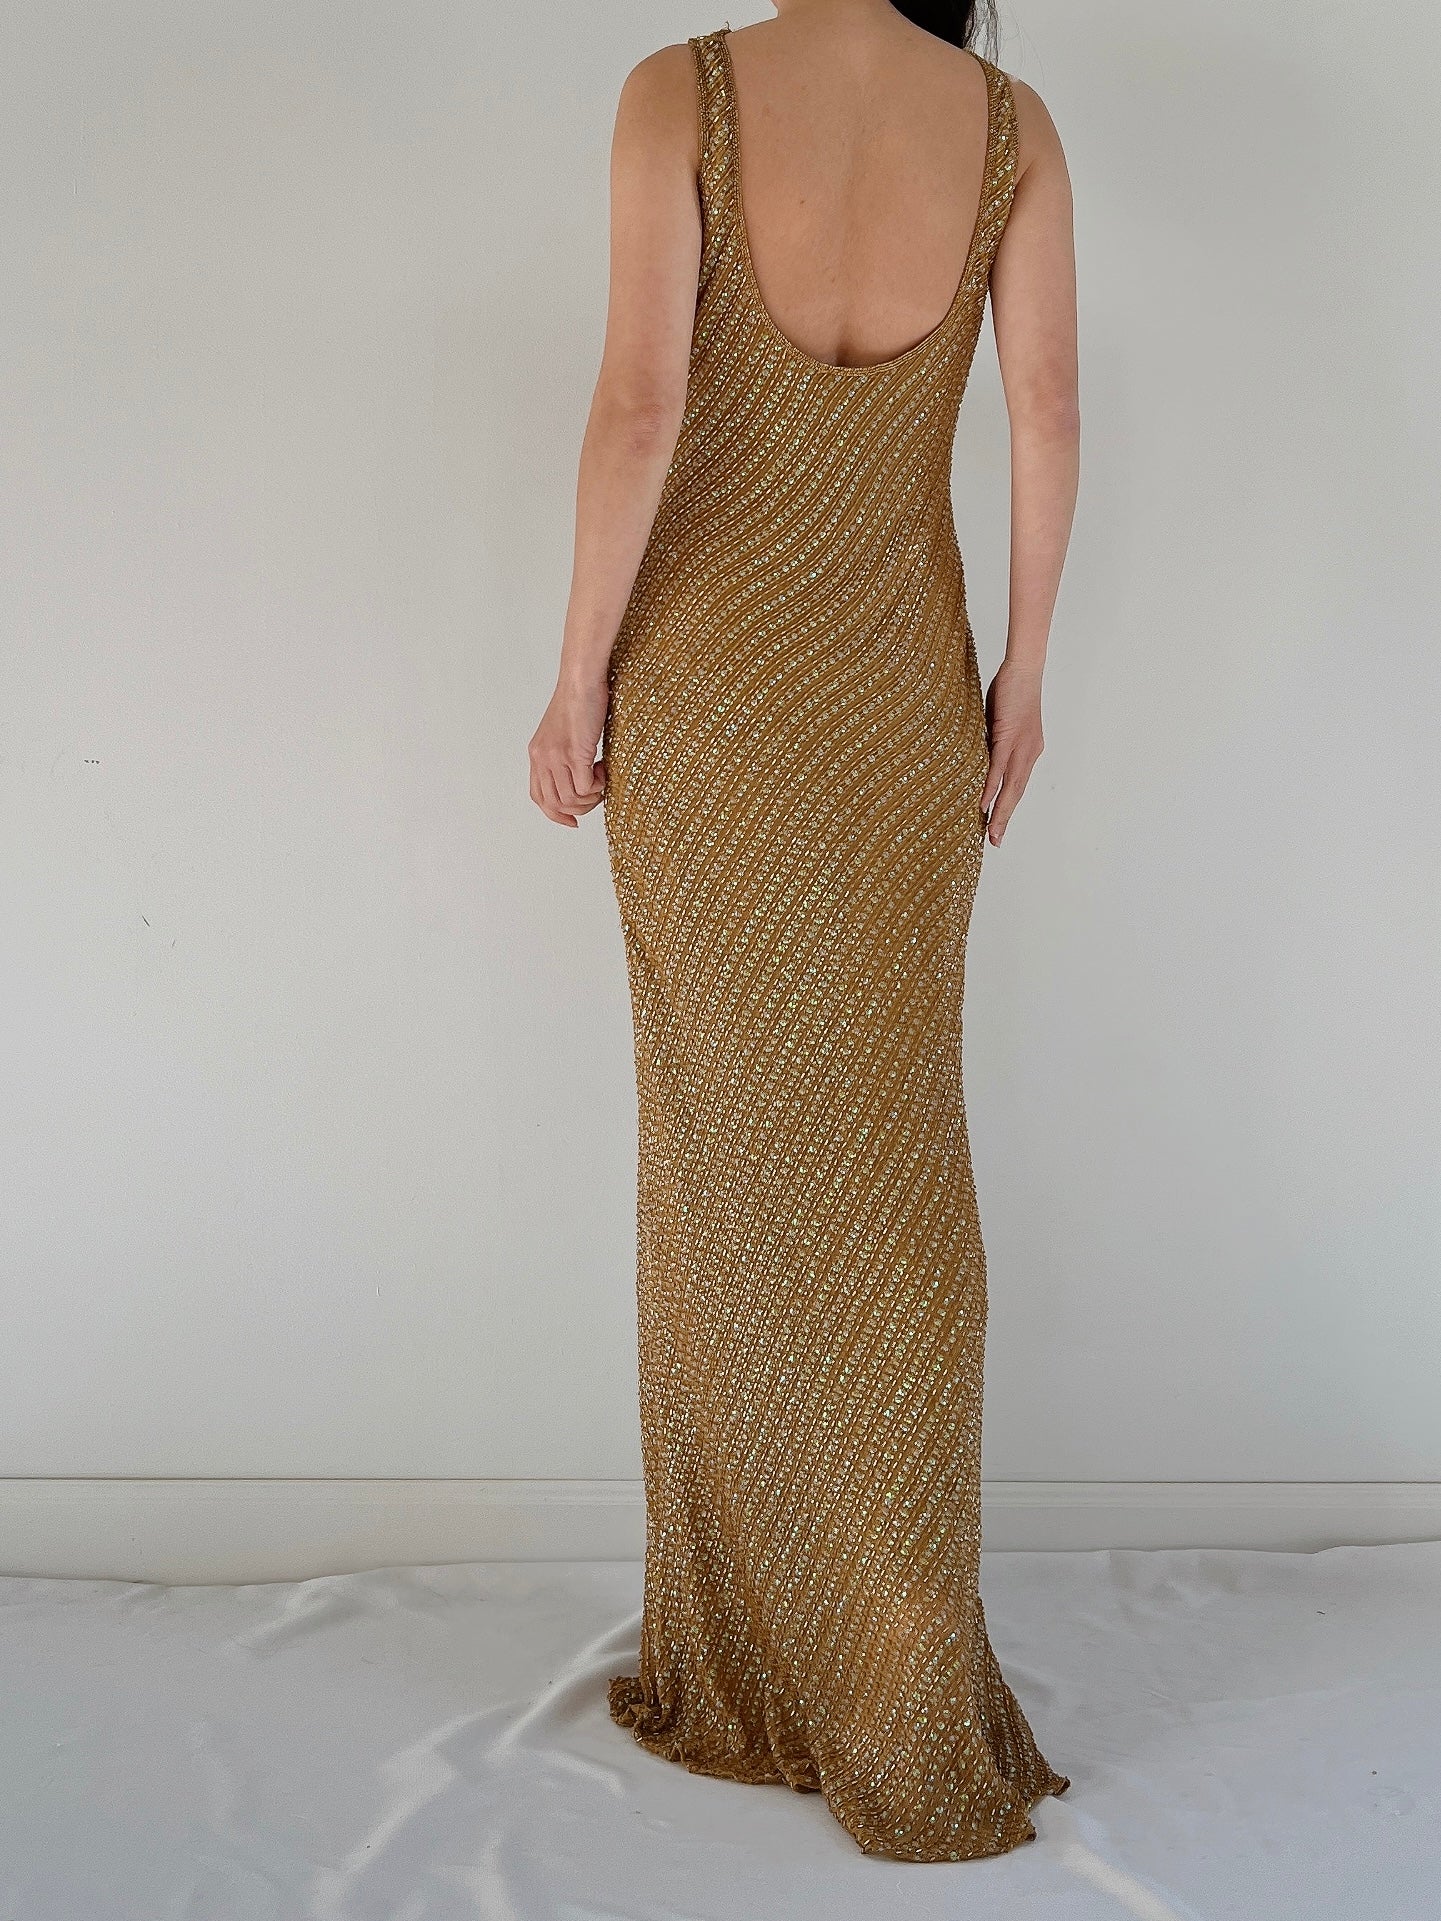 Vintage Mustard Beaded Gown - S/M